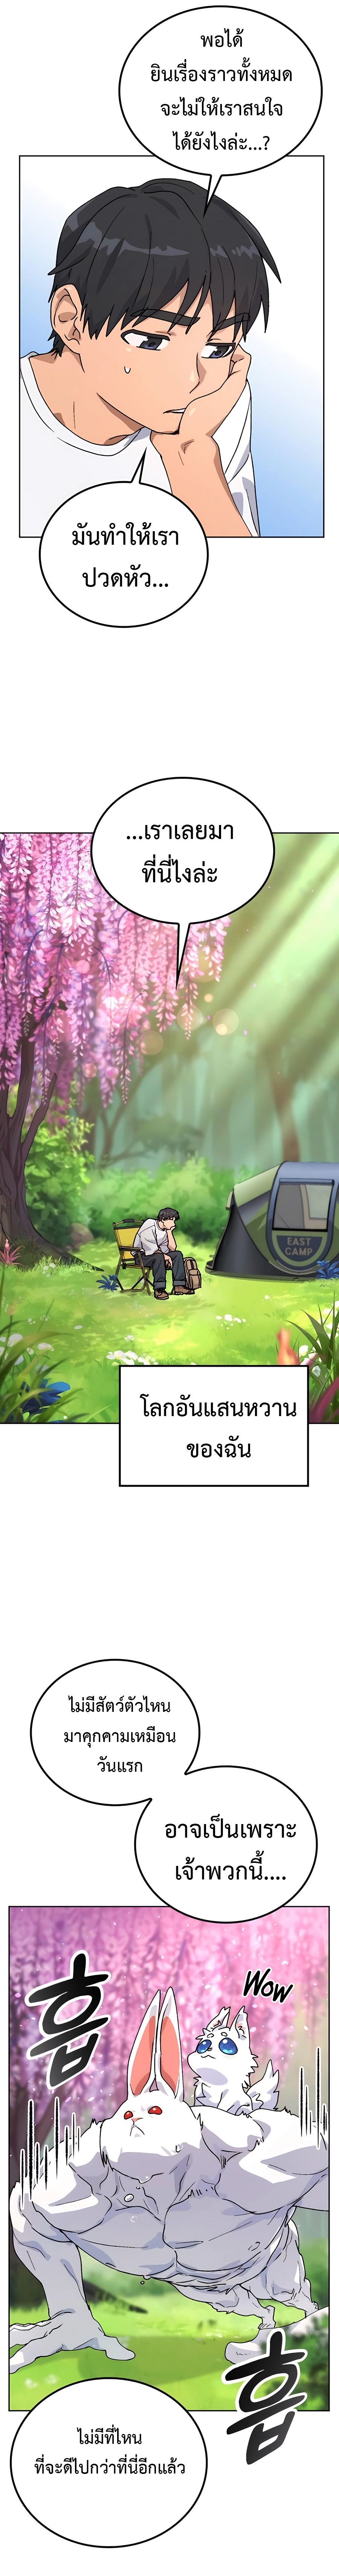 HEALING LIFE THROUGH CAMPING IN ANOTHER WORLD 8 (7)